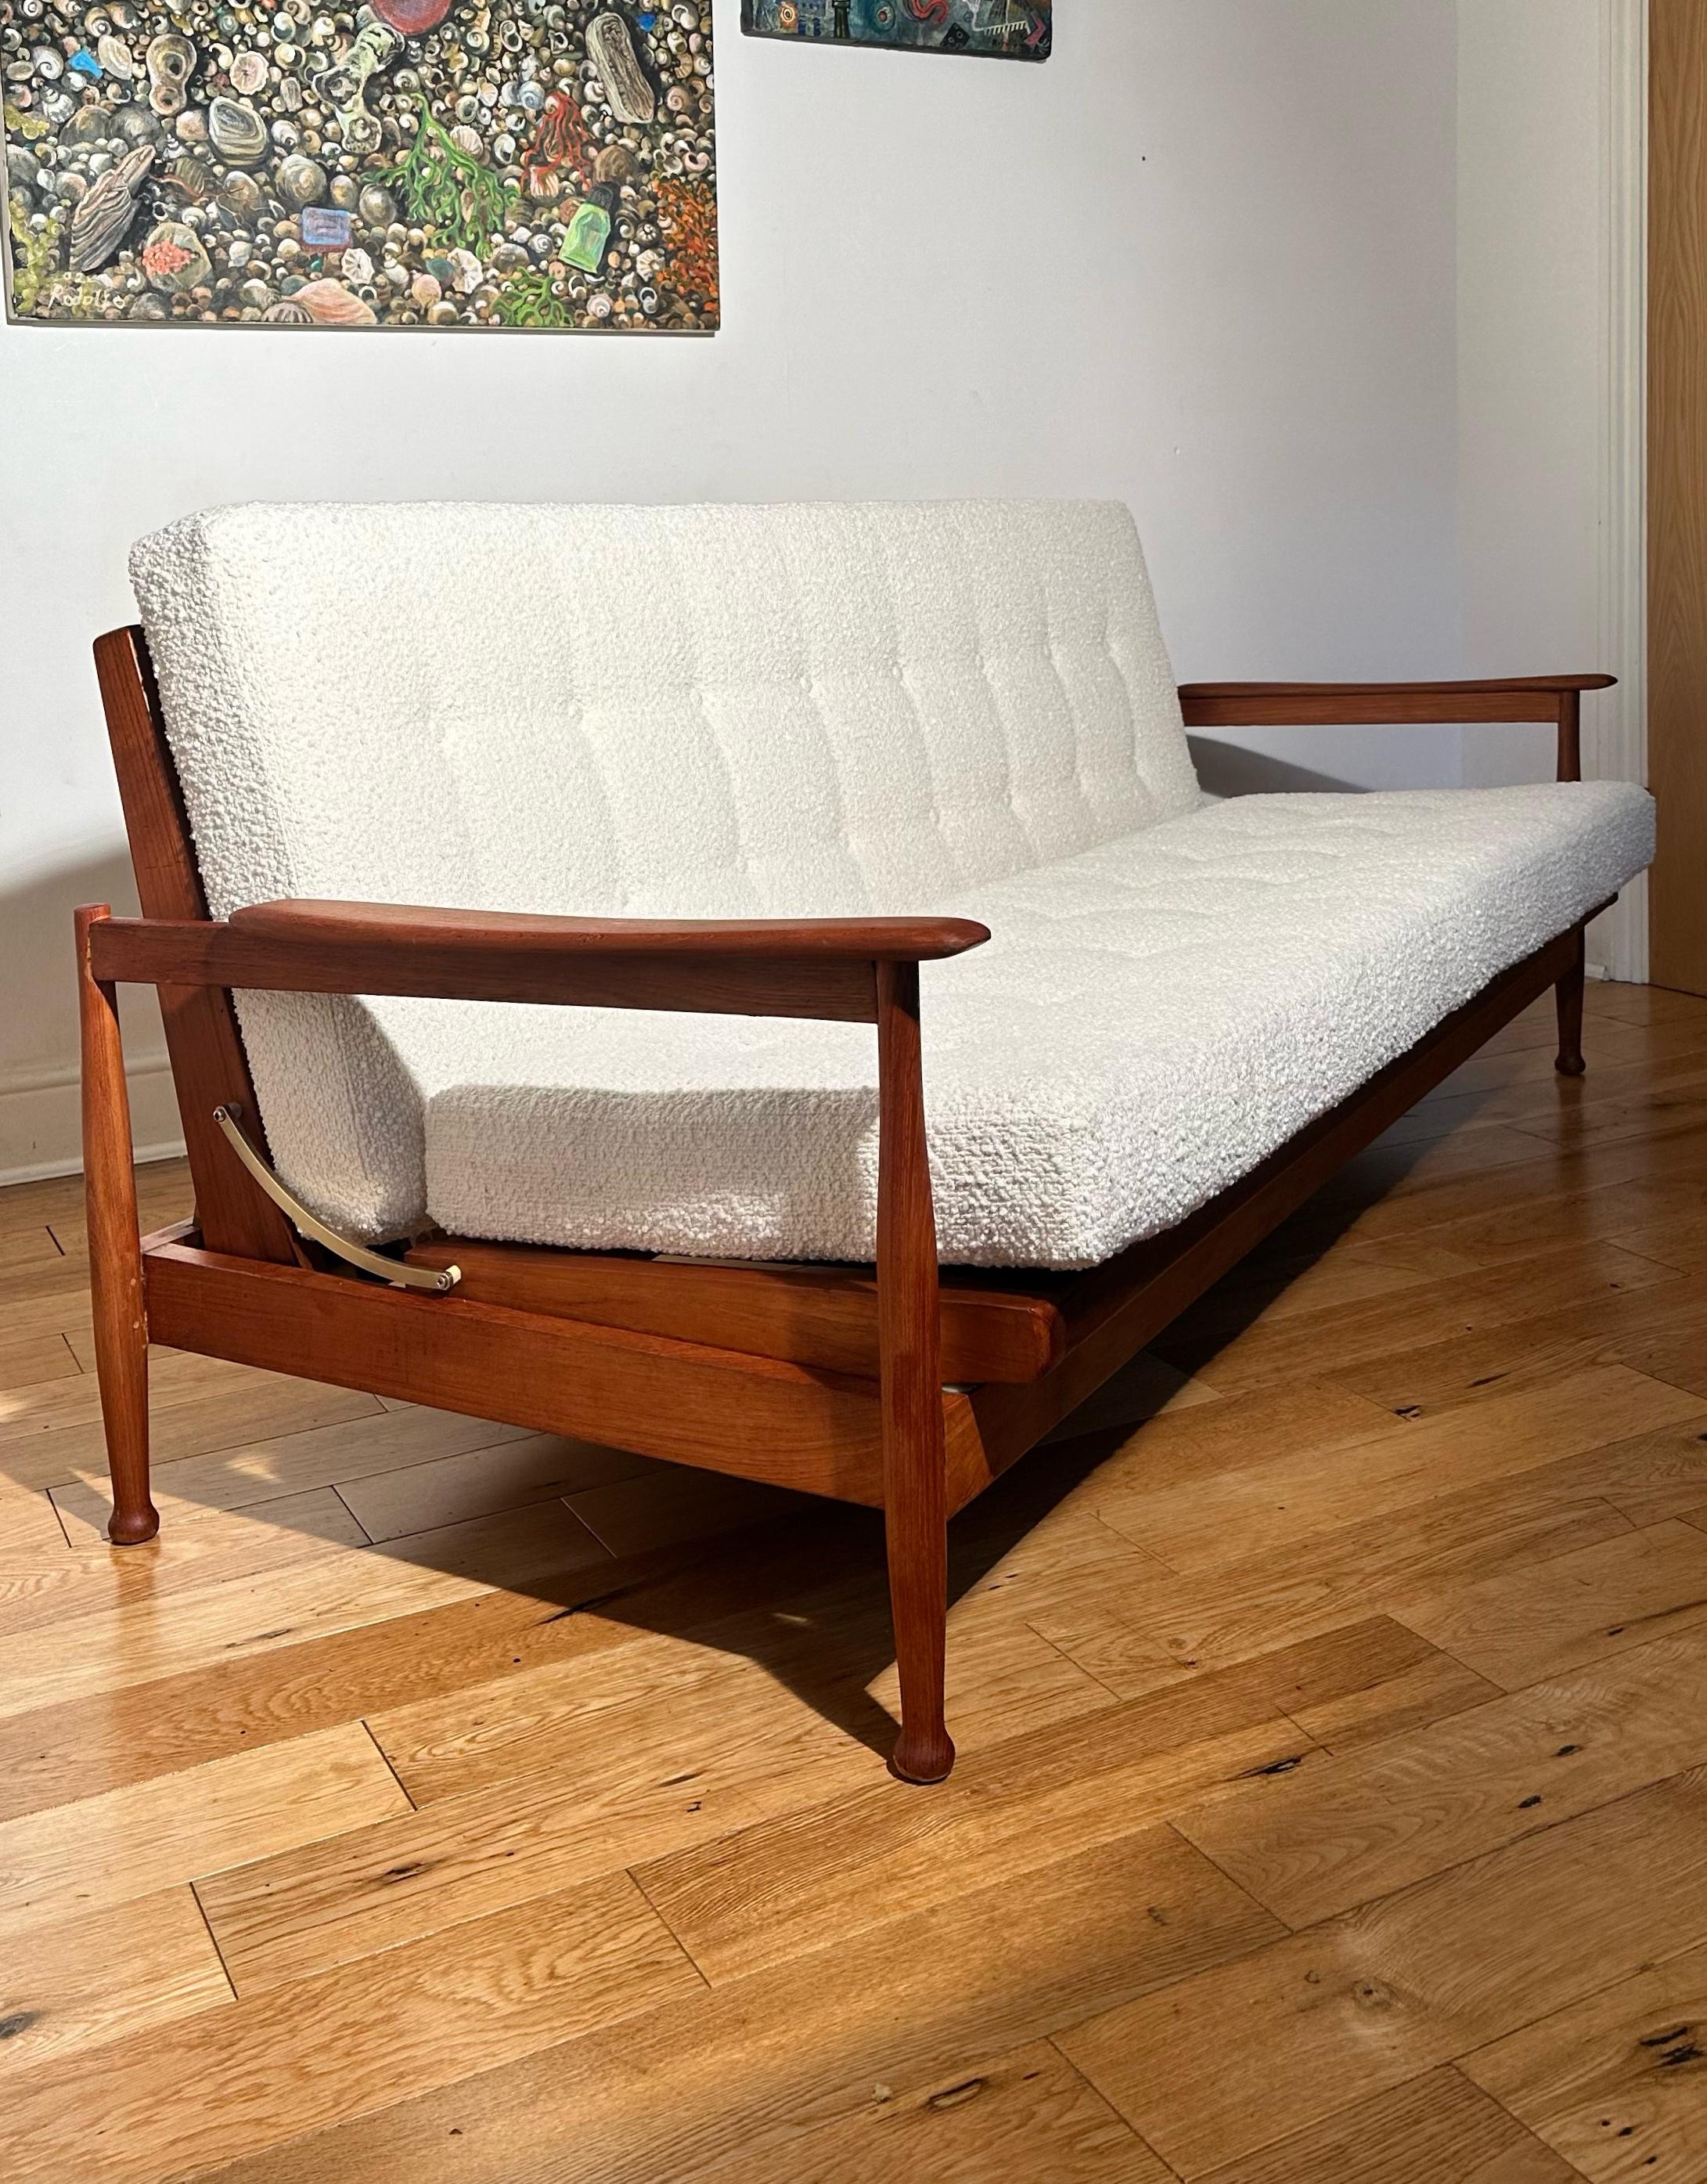 We’re happy to provide our own competitive shipping quotes with trusted couriers. Please message us with your postcode for a more accurate price. Thank you.

Stunning mid-century Guy Rogers ‘Manhattan’ sofa bed manufactured in the 1960s 
Beautifully